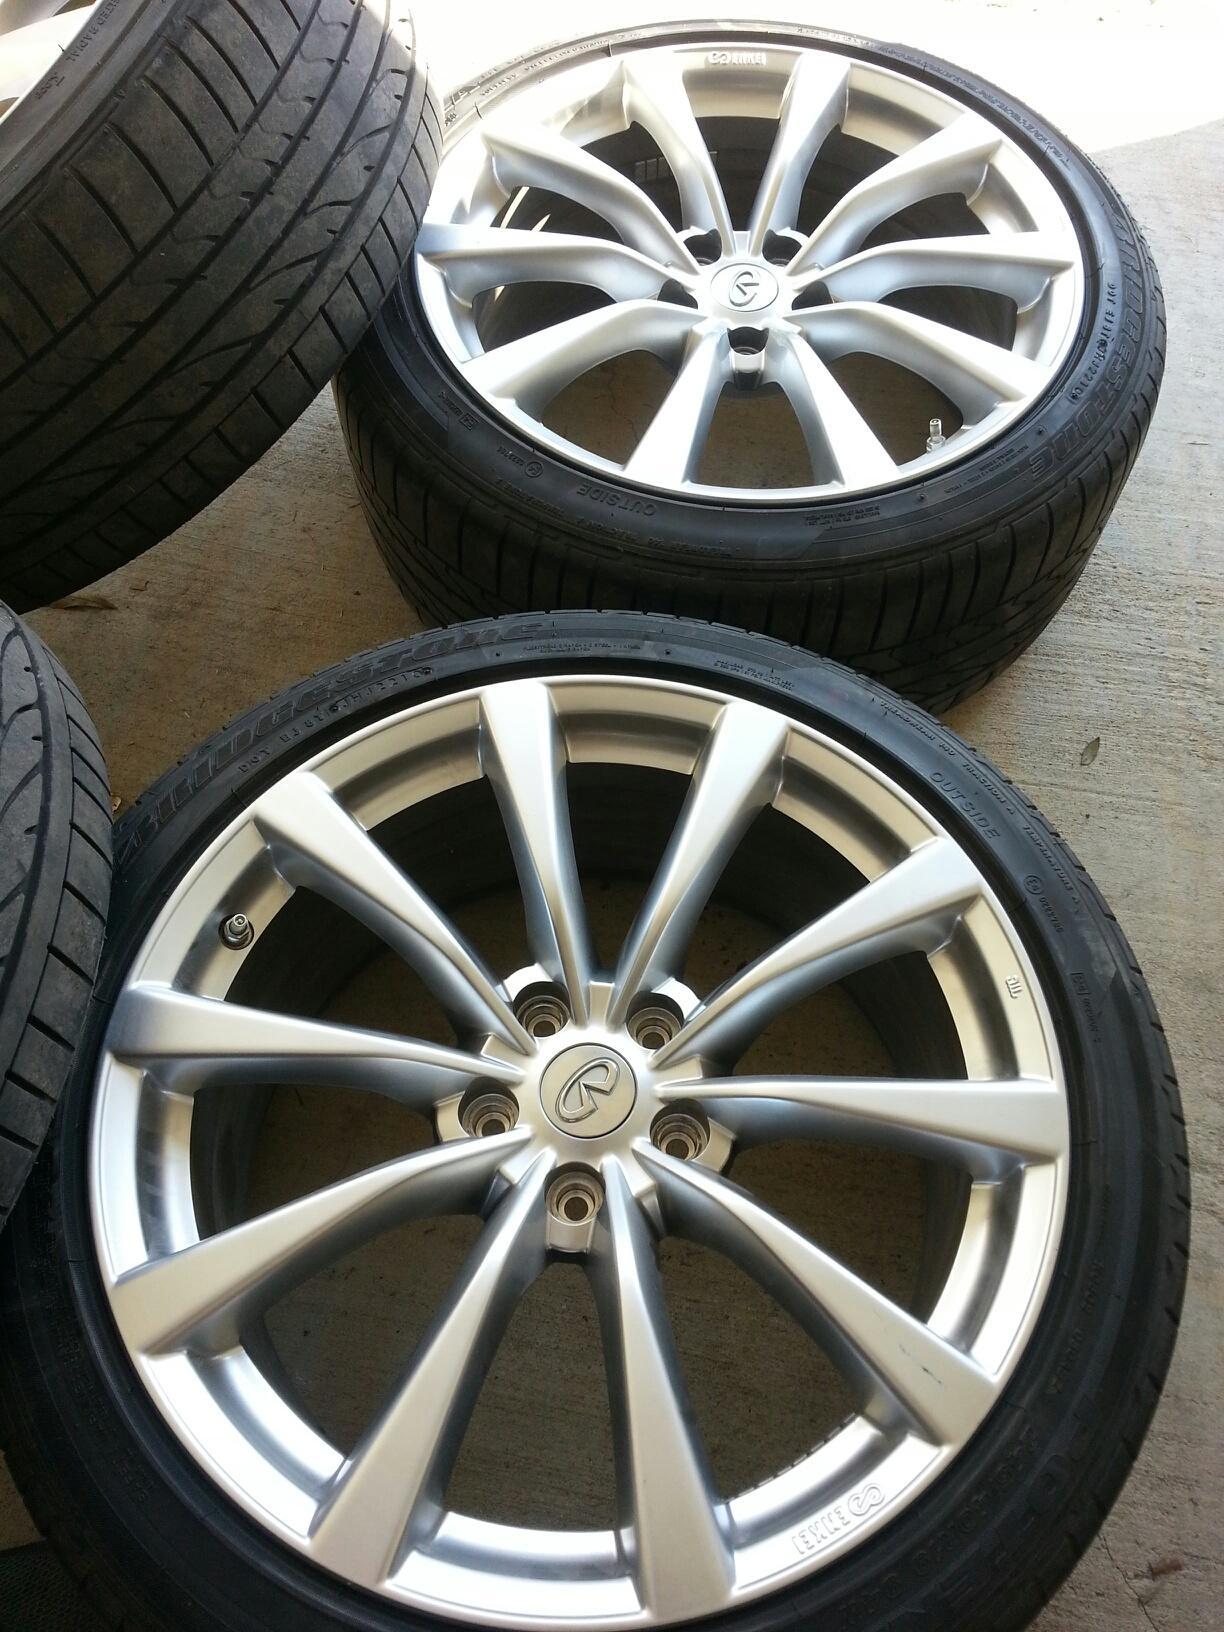 For Sale 19 inch coupe wheels/tires - MyG37